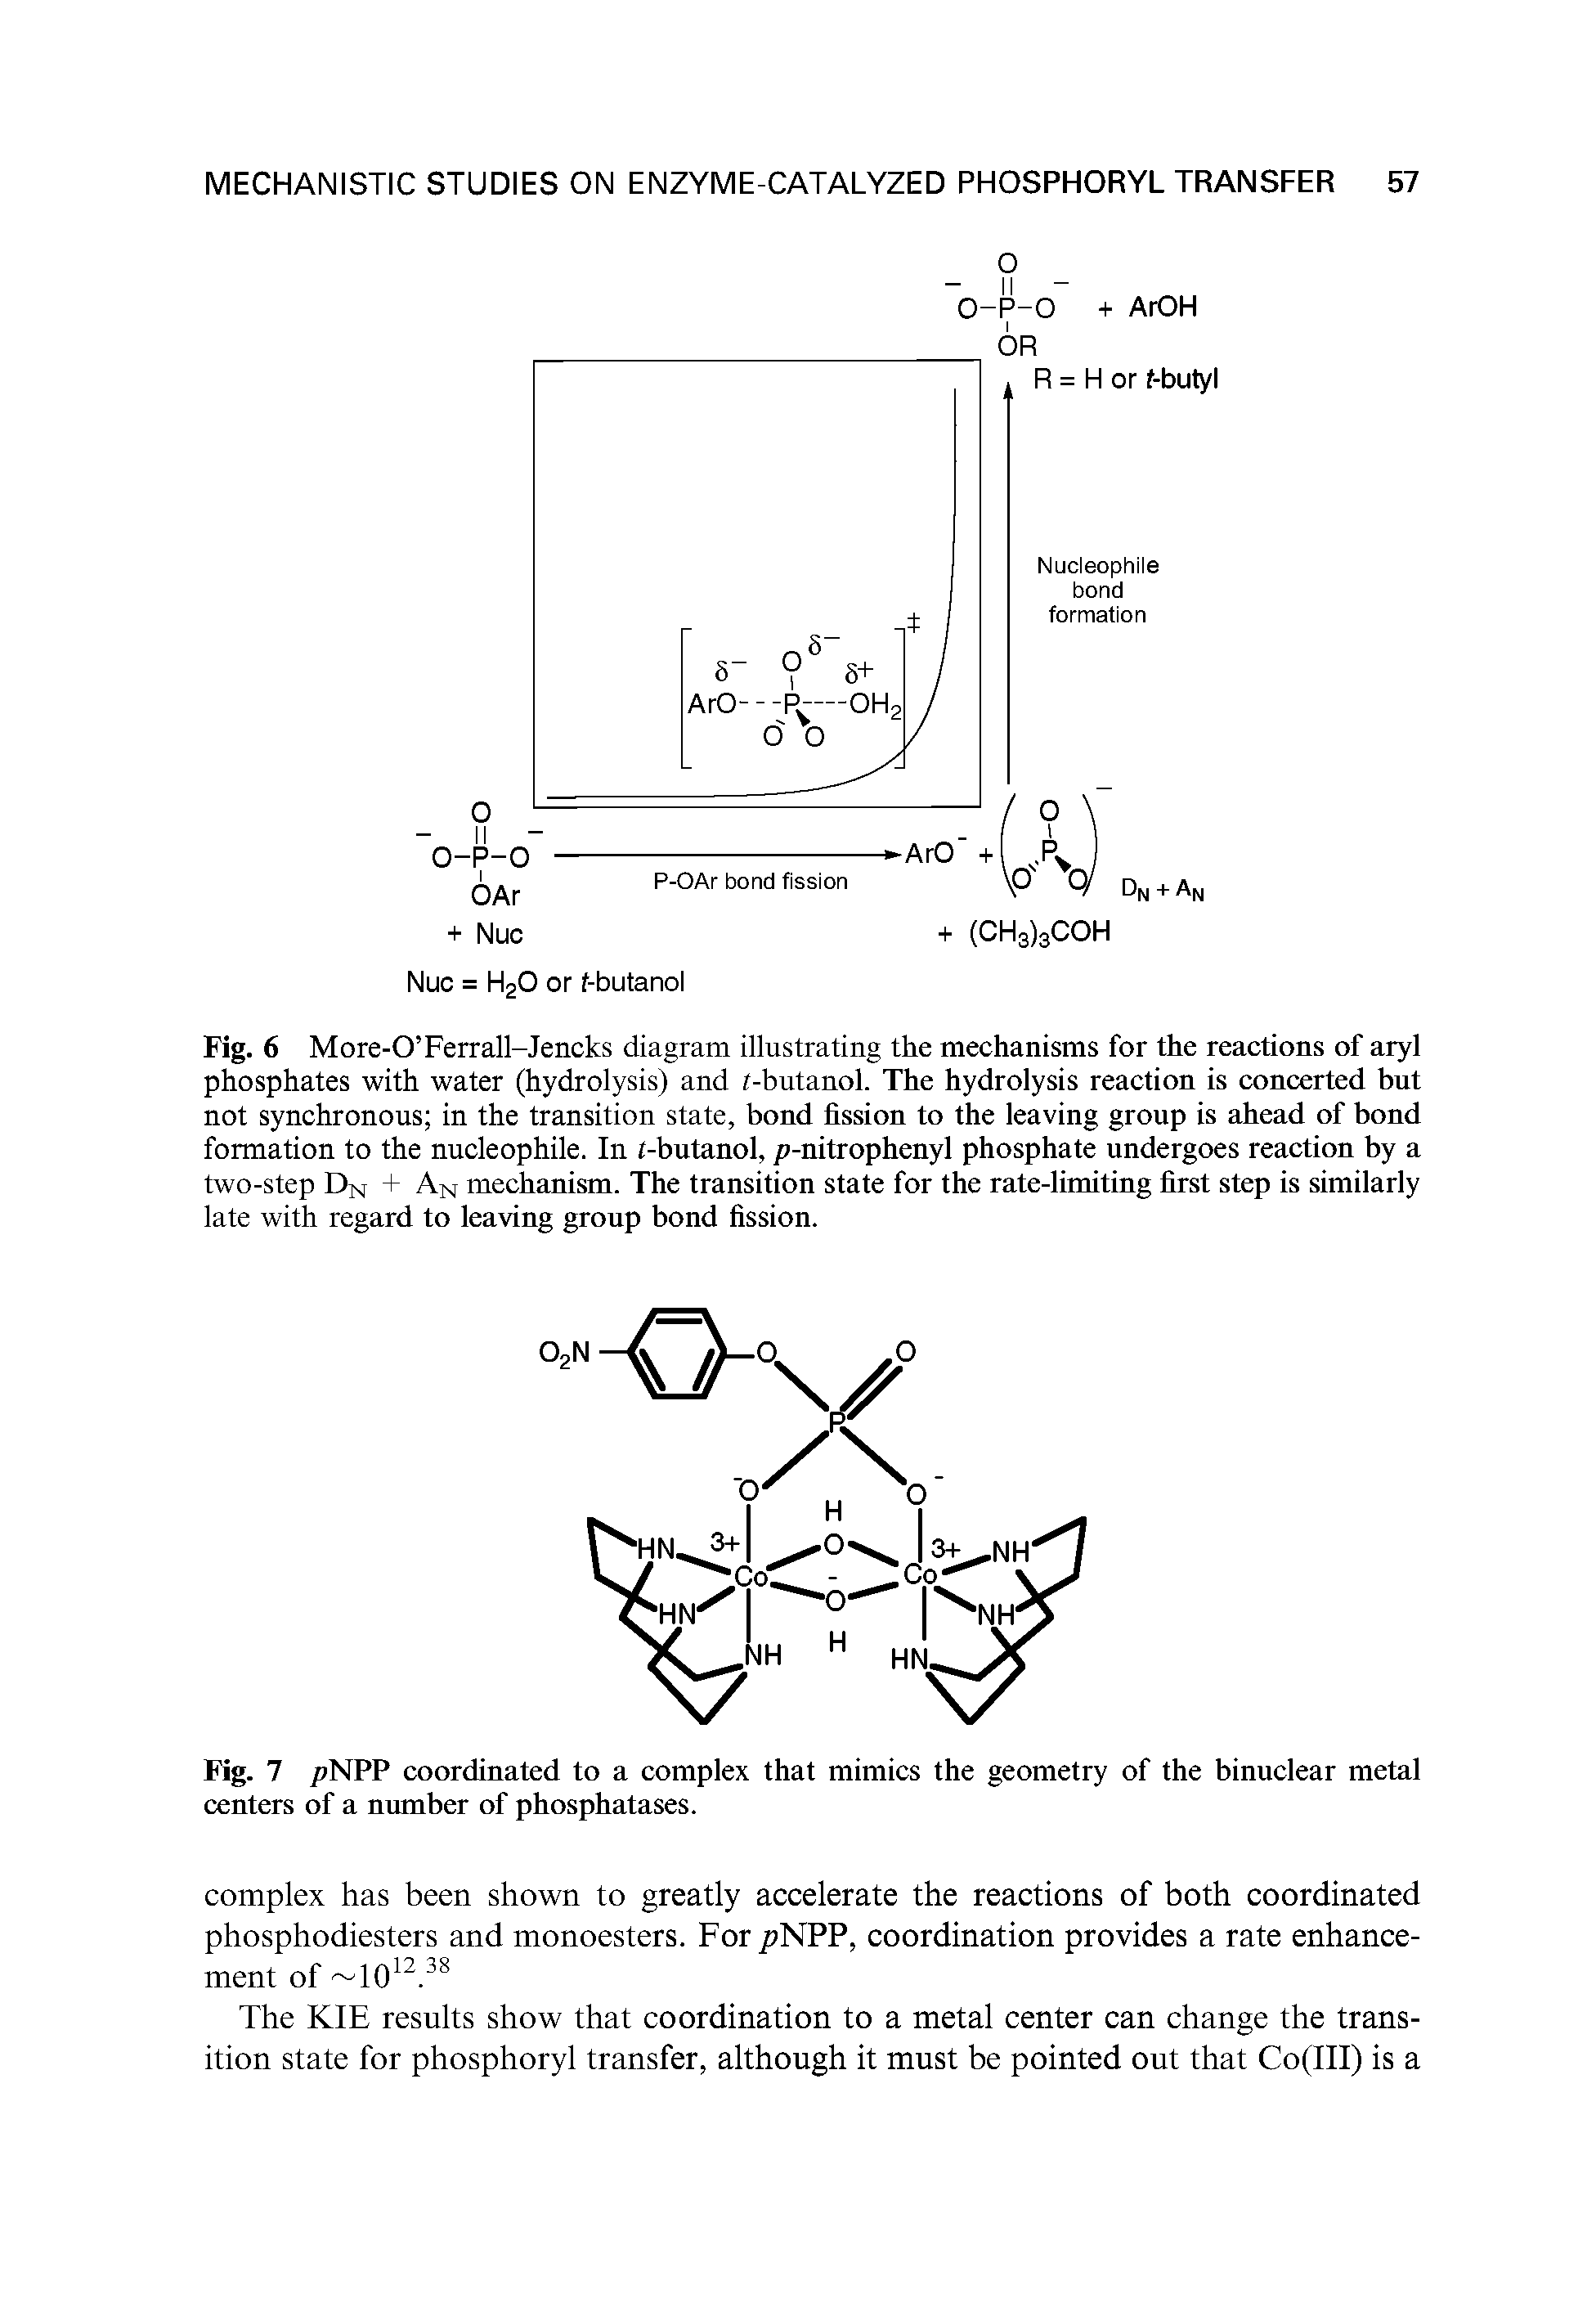 Fig. 6 More-O Ferrall-Jencks diagram illustrating the mechanisms for the reactions of aryl phosphates with water (hydrolysis) and /-butanol. The hydrolysis reaction is concerted but not synchronous in the transition state, bond fission to the leaving group is ahead of bond formation to the nucleophile. In /-butanol, p-nitrophenyl phosphate undergoes reaction by a two-step Dn + An mechanism. The transition state for the rate-limiting first step is similarly late with regard to leaving group bond fission.